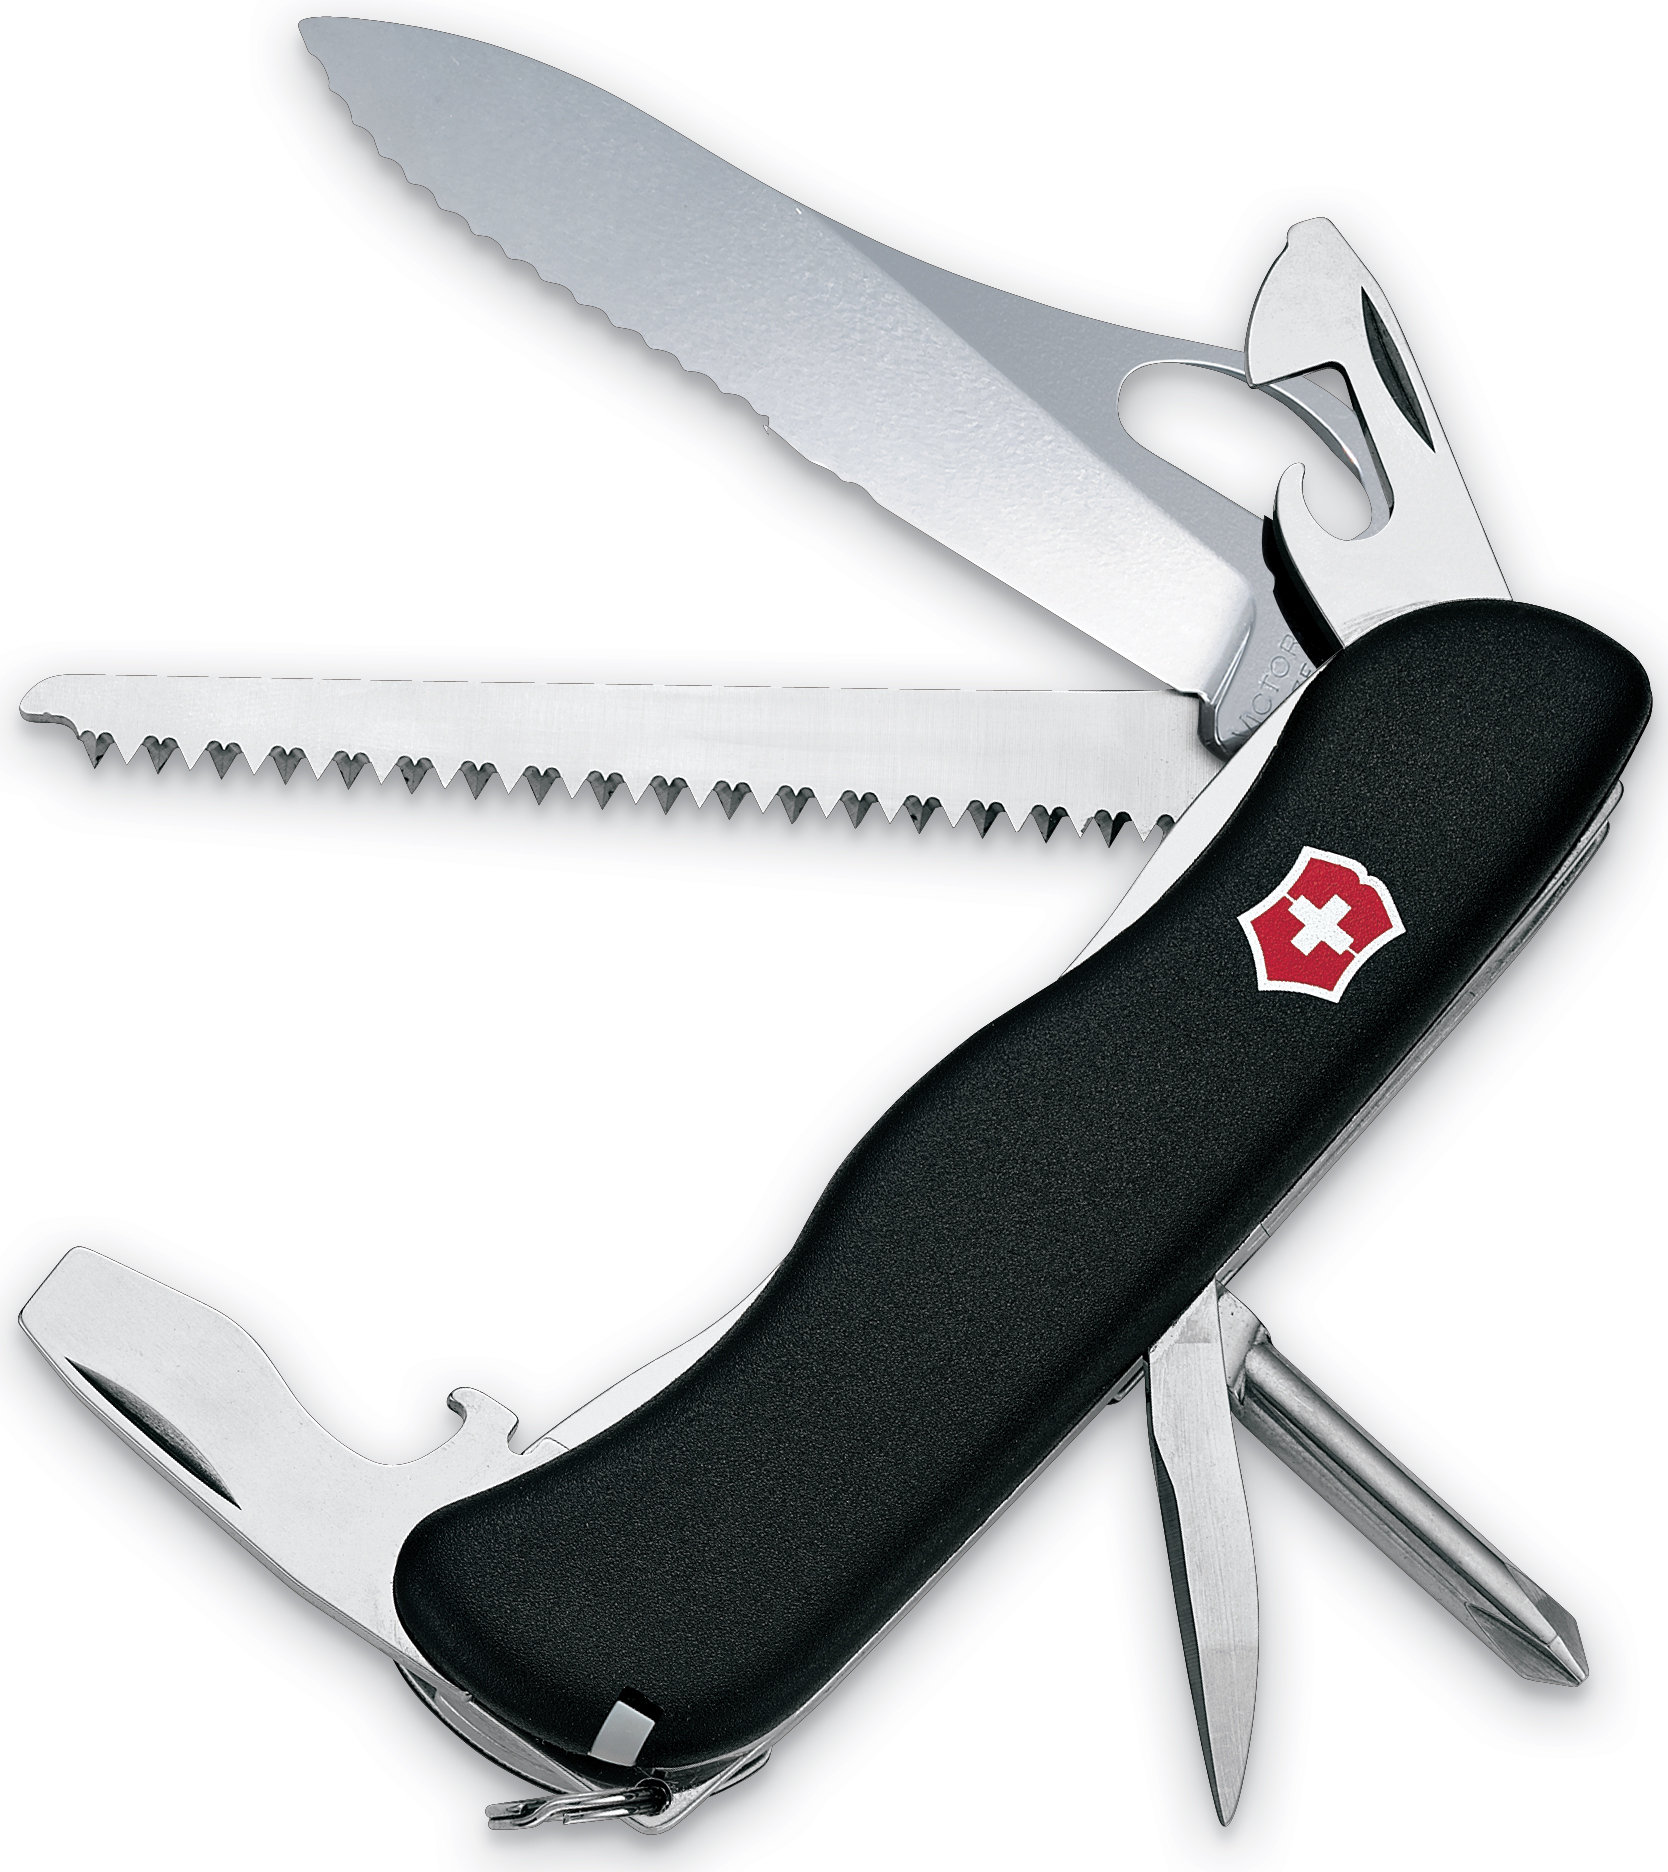 Victorinox Swiss Army Rescue Tool Pocket Knife with Pouch + Pocket